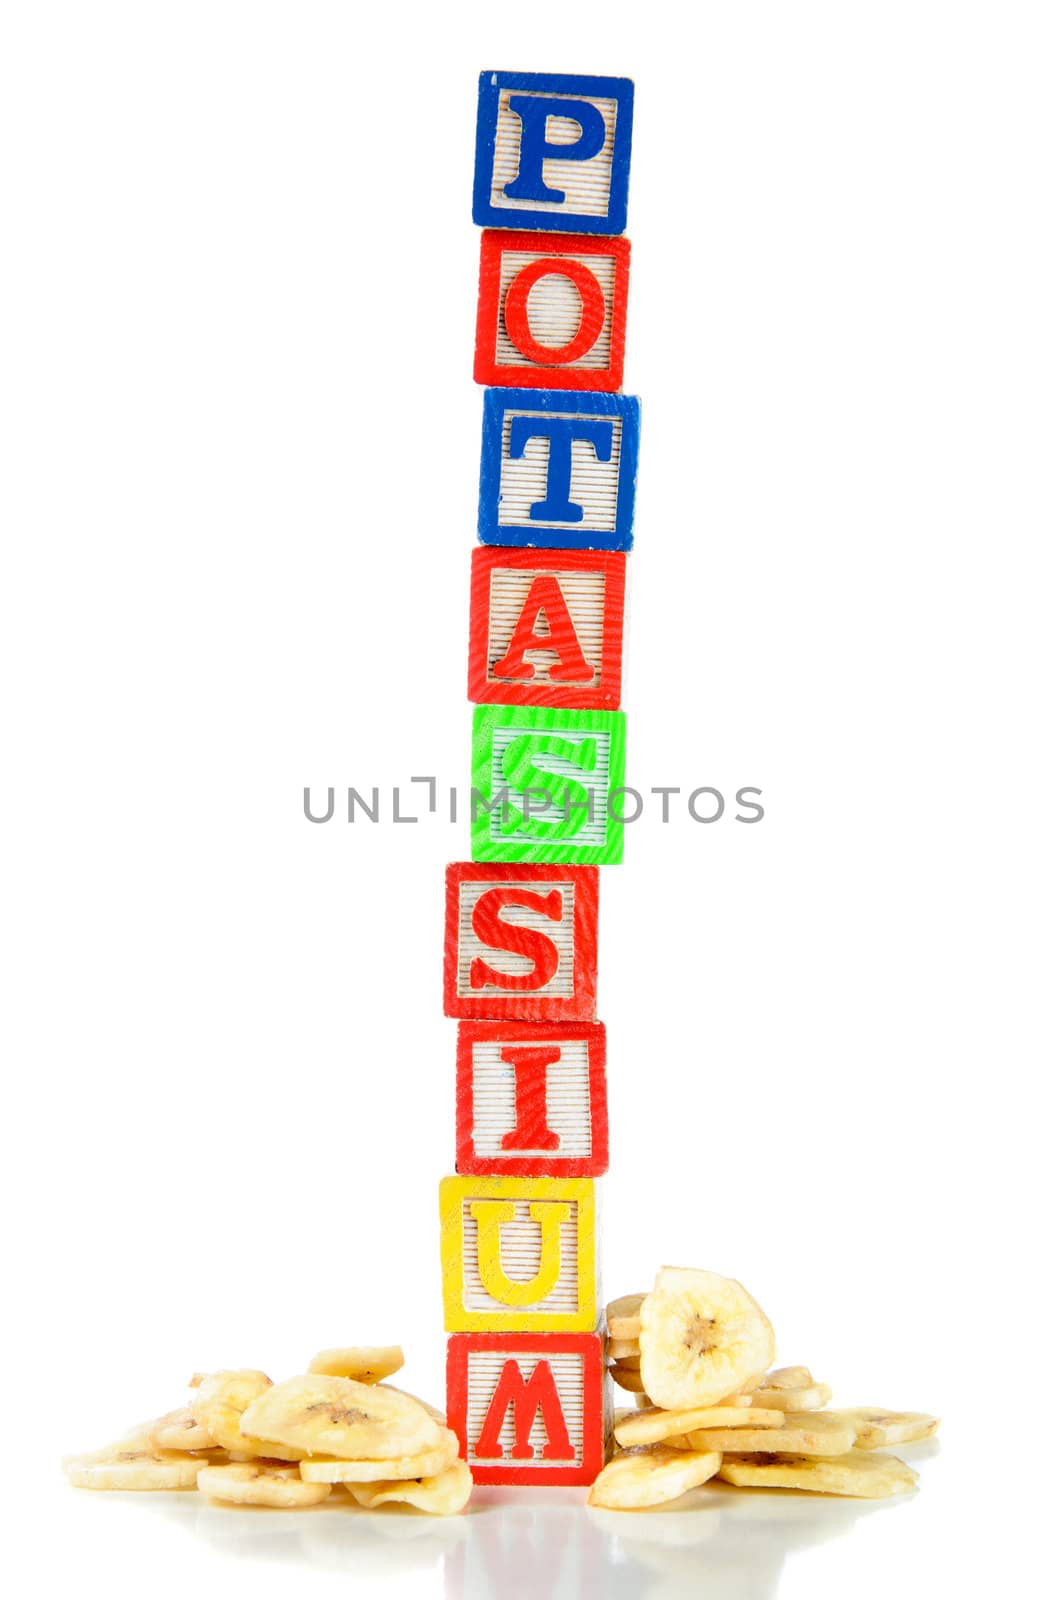 Banana chips are high in potassium, isolated against a white background.